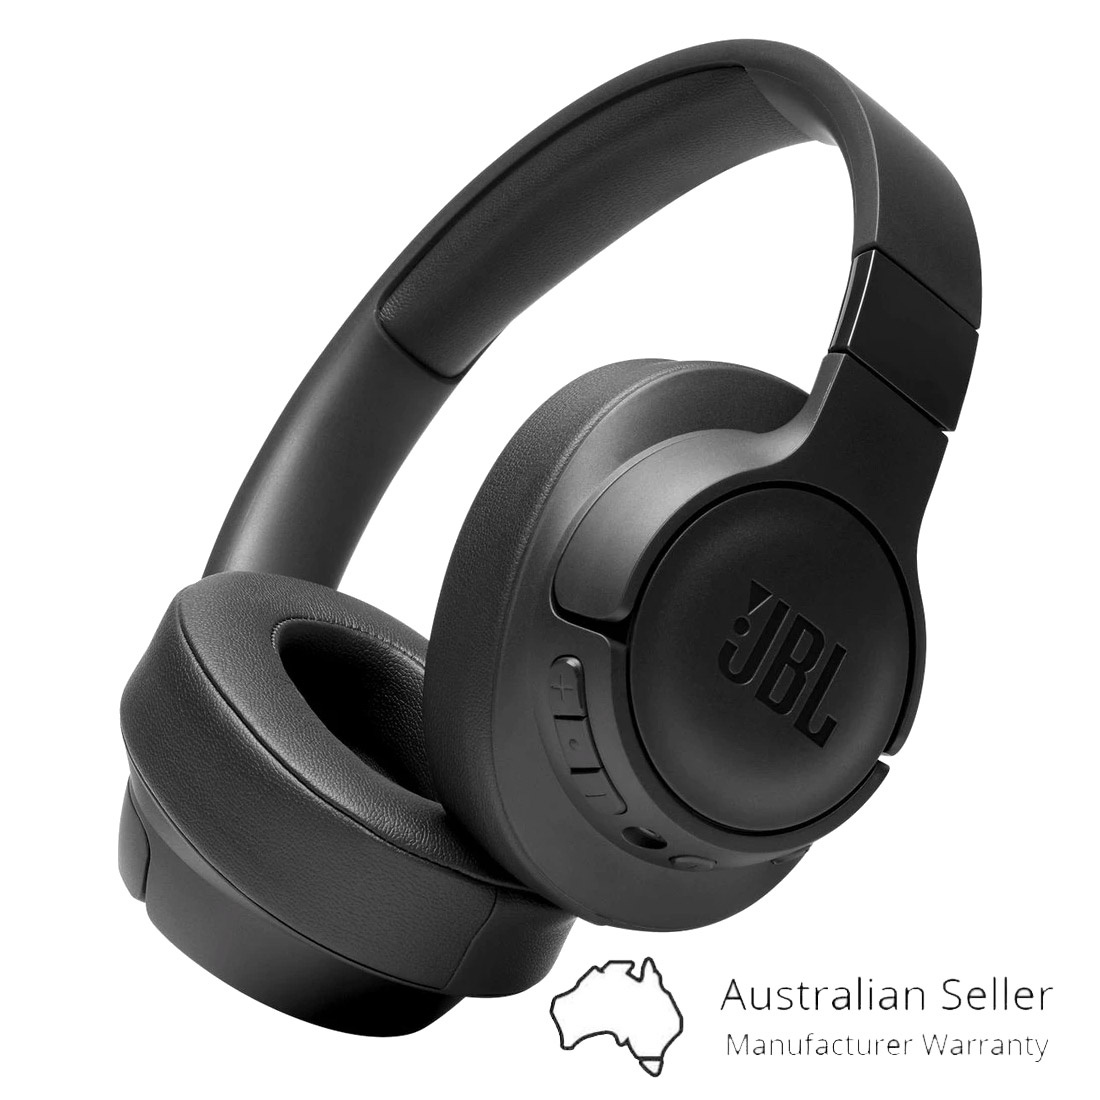 Step-by-Step Guide to Setting Up Your JBL Live Noise Cancelling Wireless Headphones